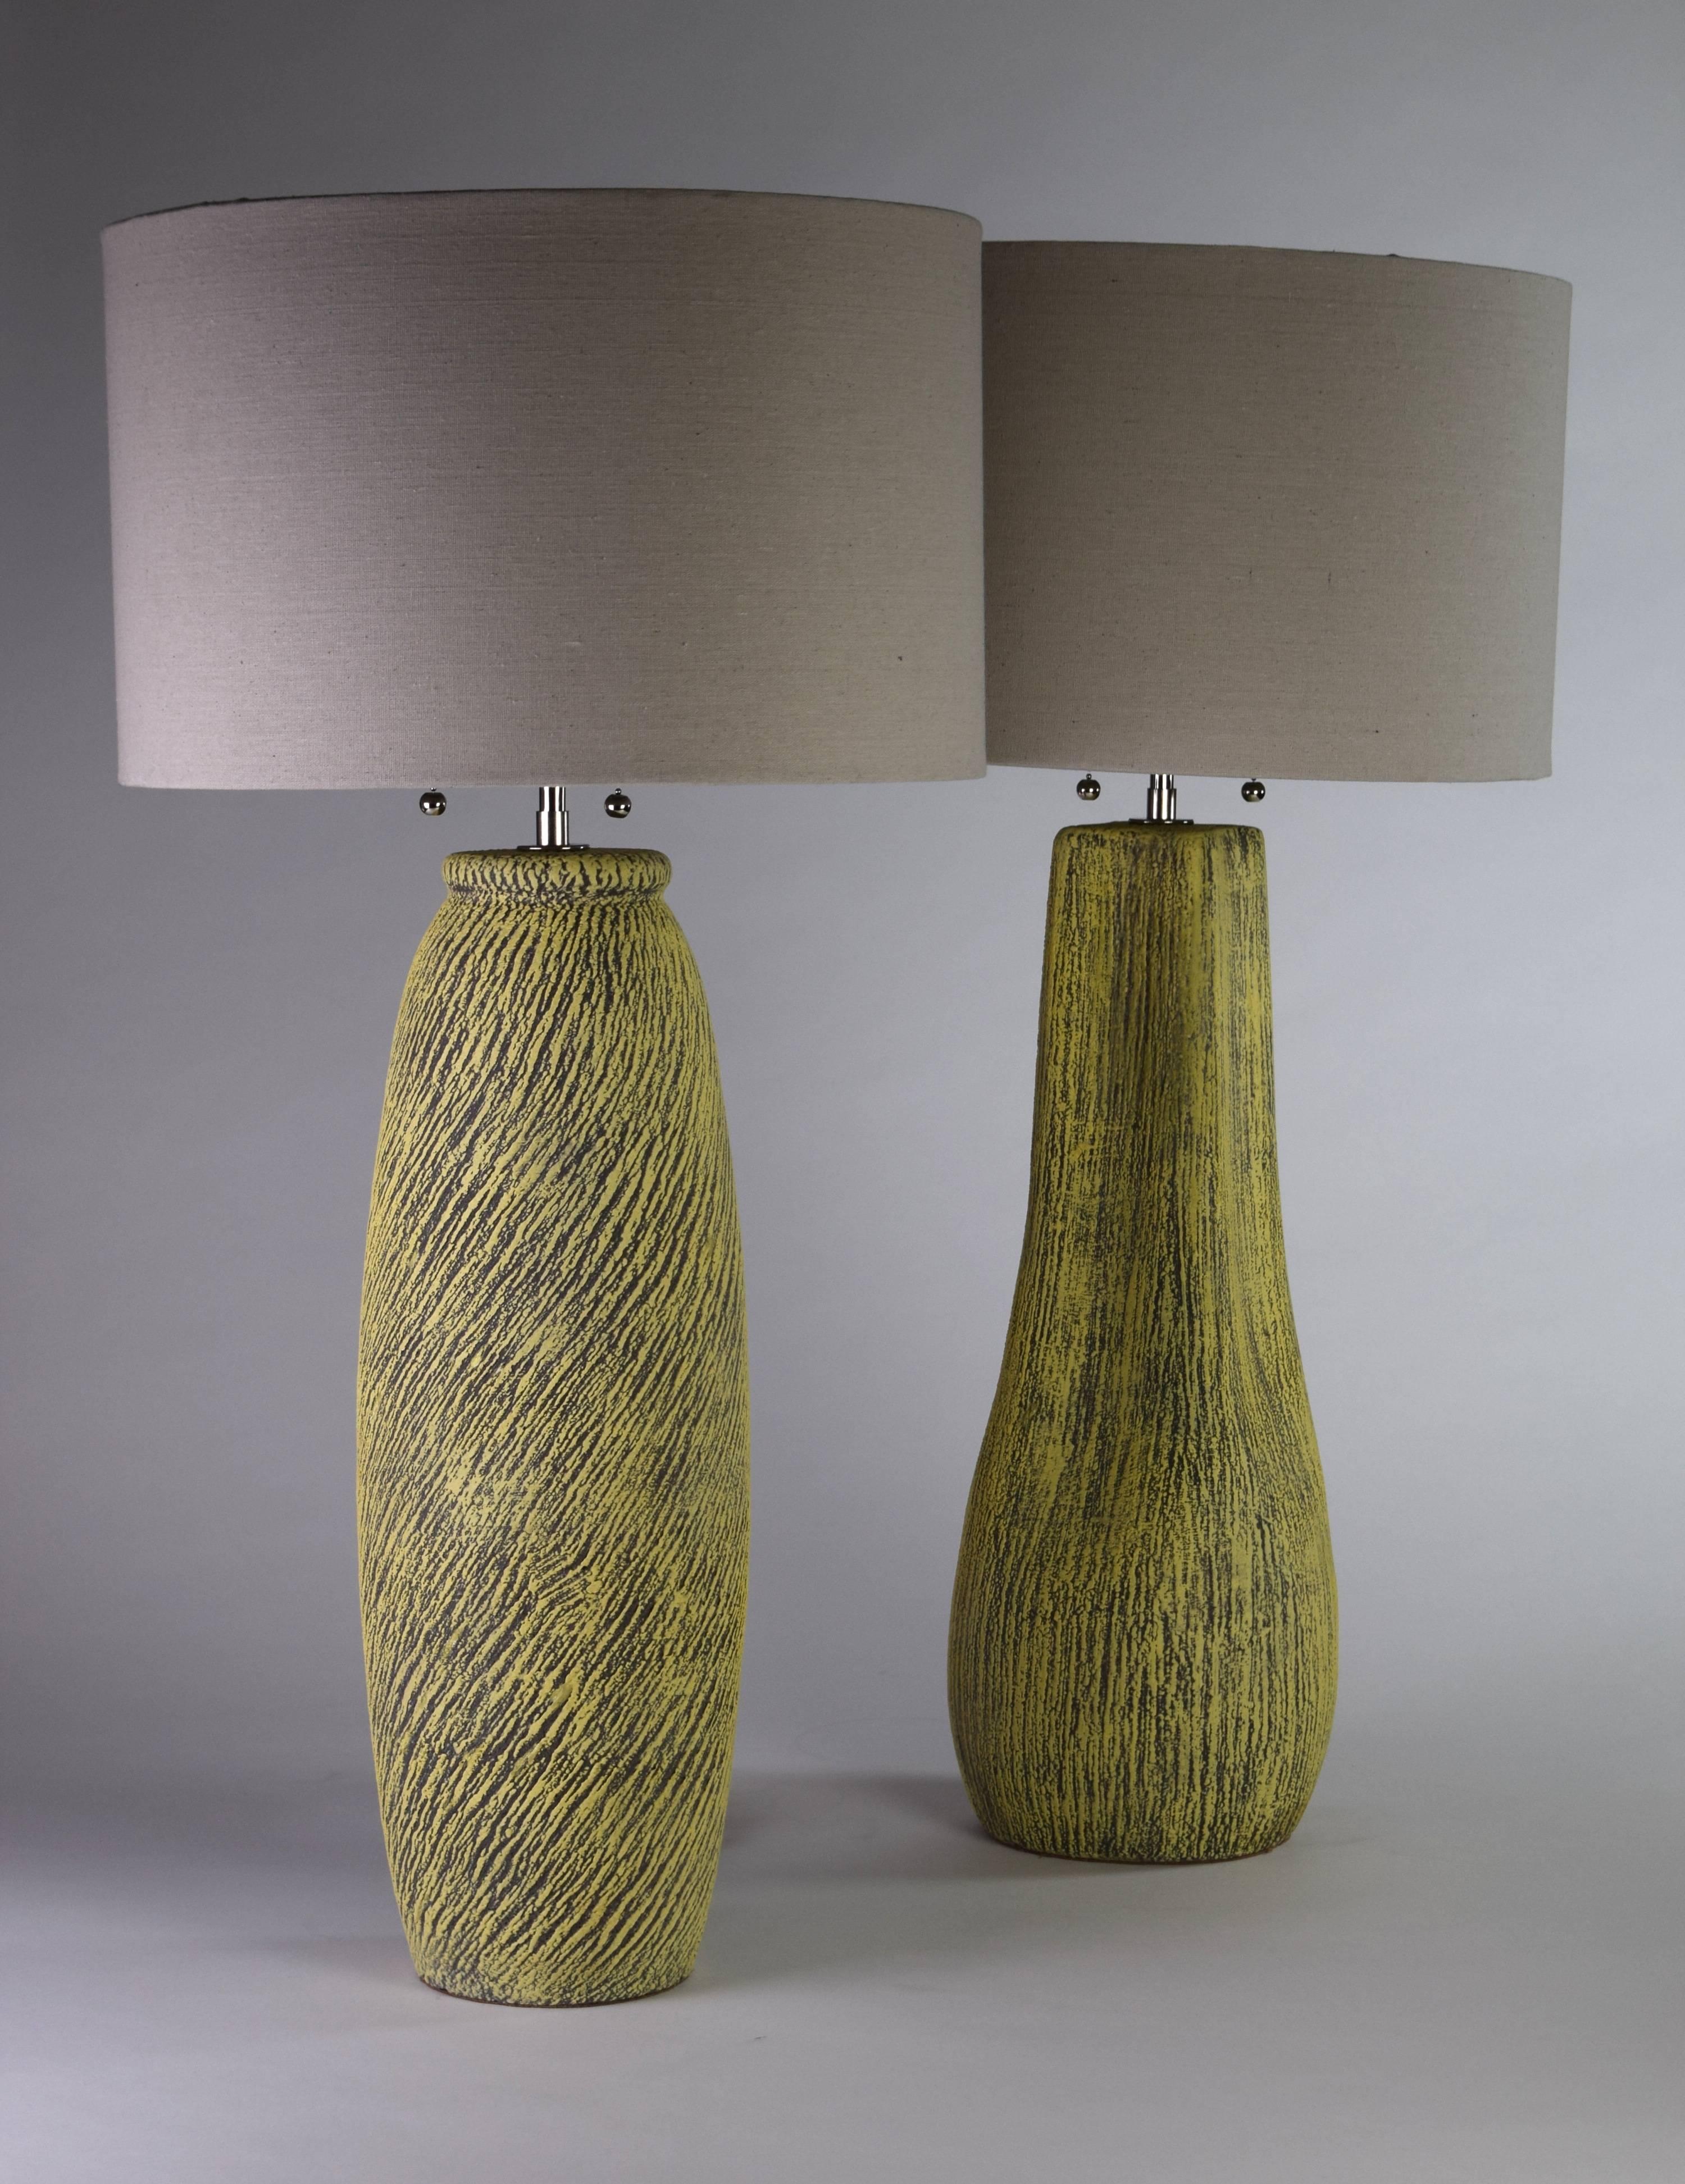 20th Century Mid-Century Modern Ceramic Pair of Lamps by Kelby